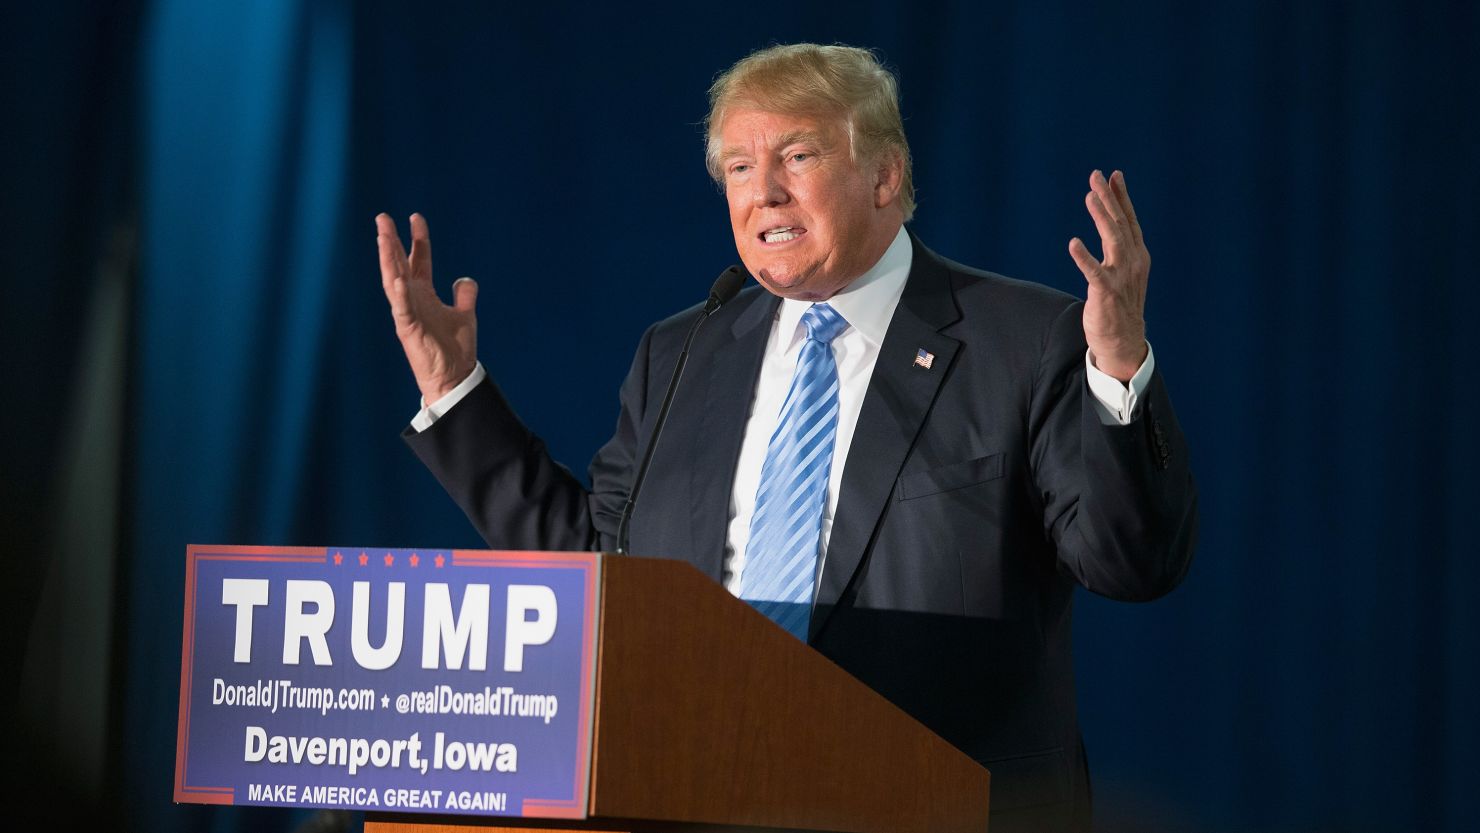 Republican presidential candidate Donald Trump in Davenport, Iowa on on December 5, 2015.